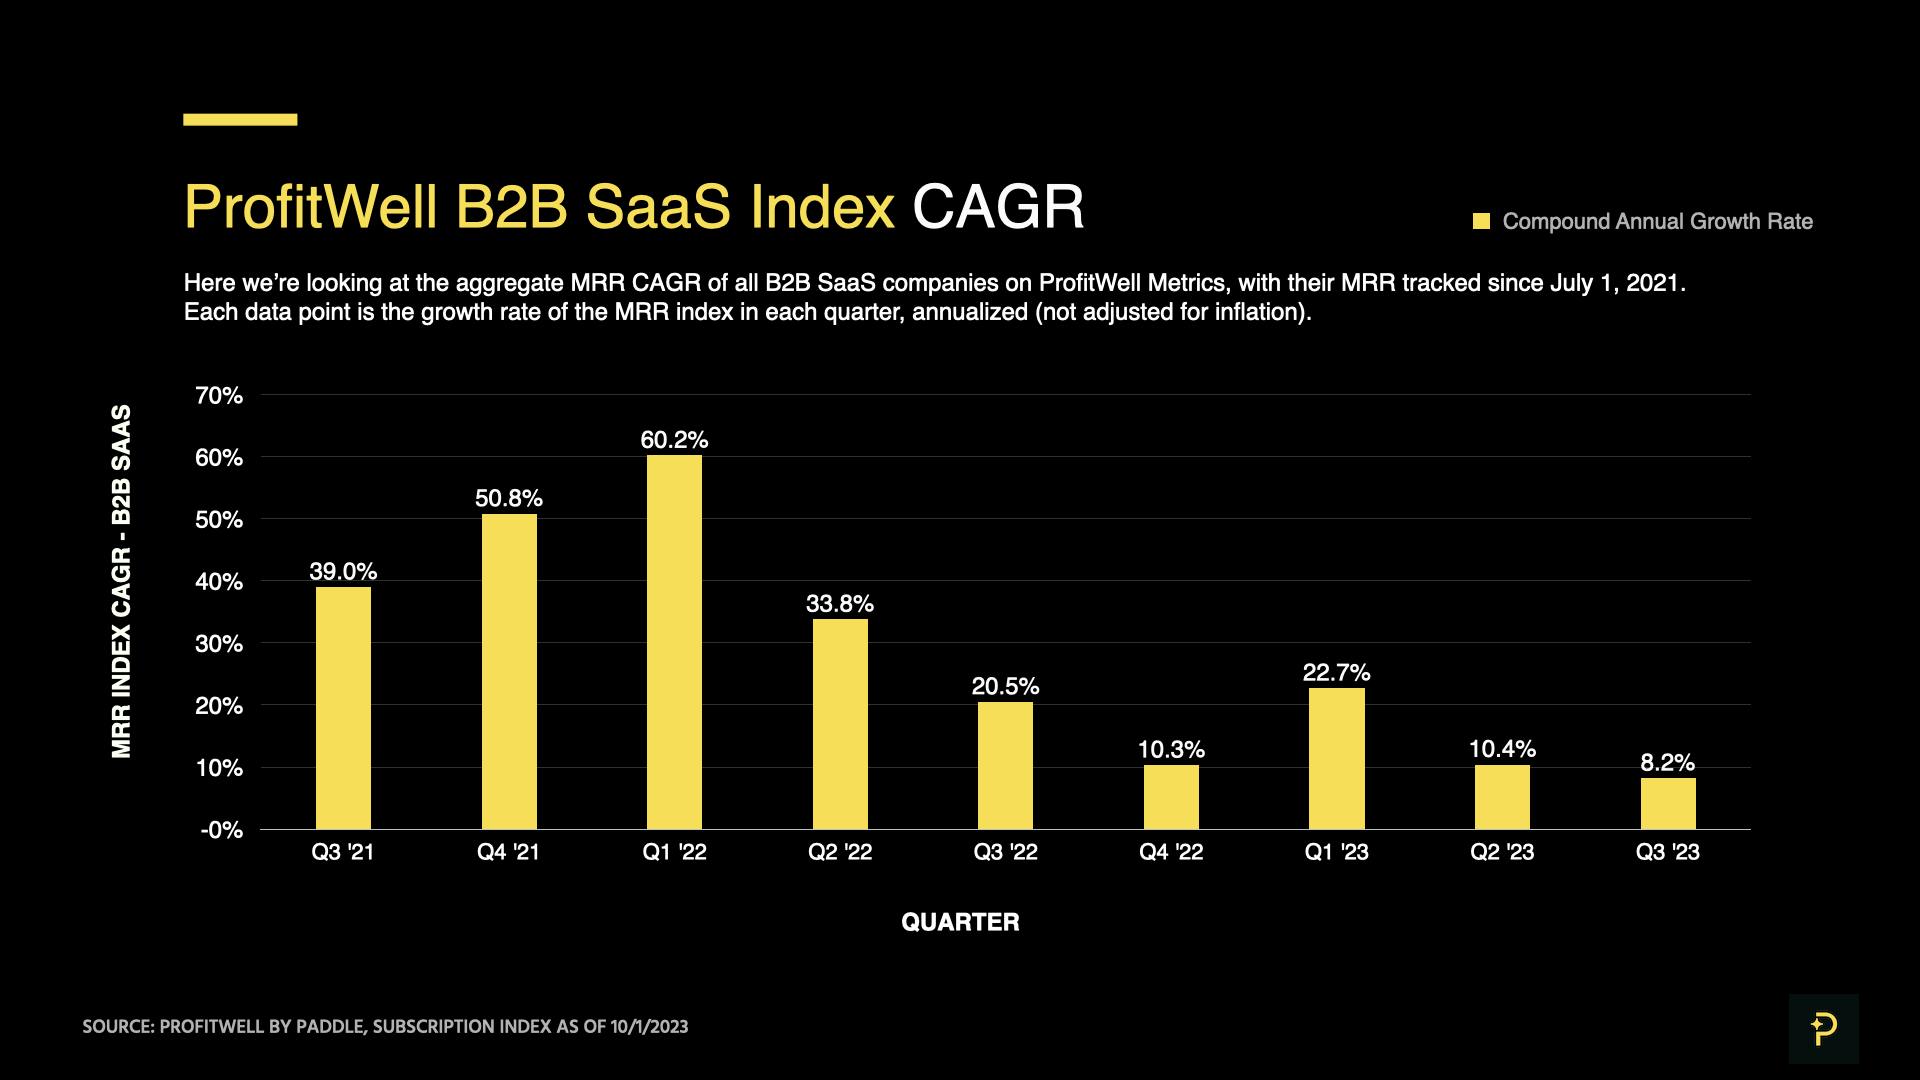 ProfitWell B2B SaaS Index as of October 1, 2023 - Compound Annual Growth Rate in MRR, Quarterly